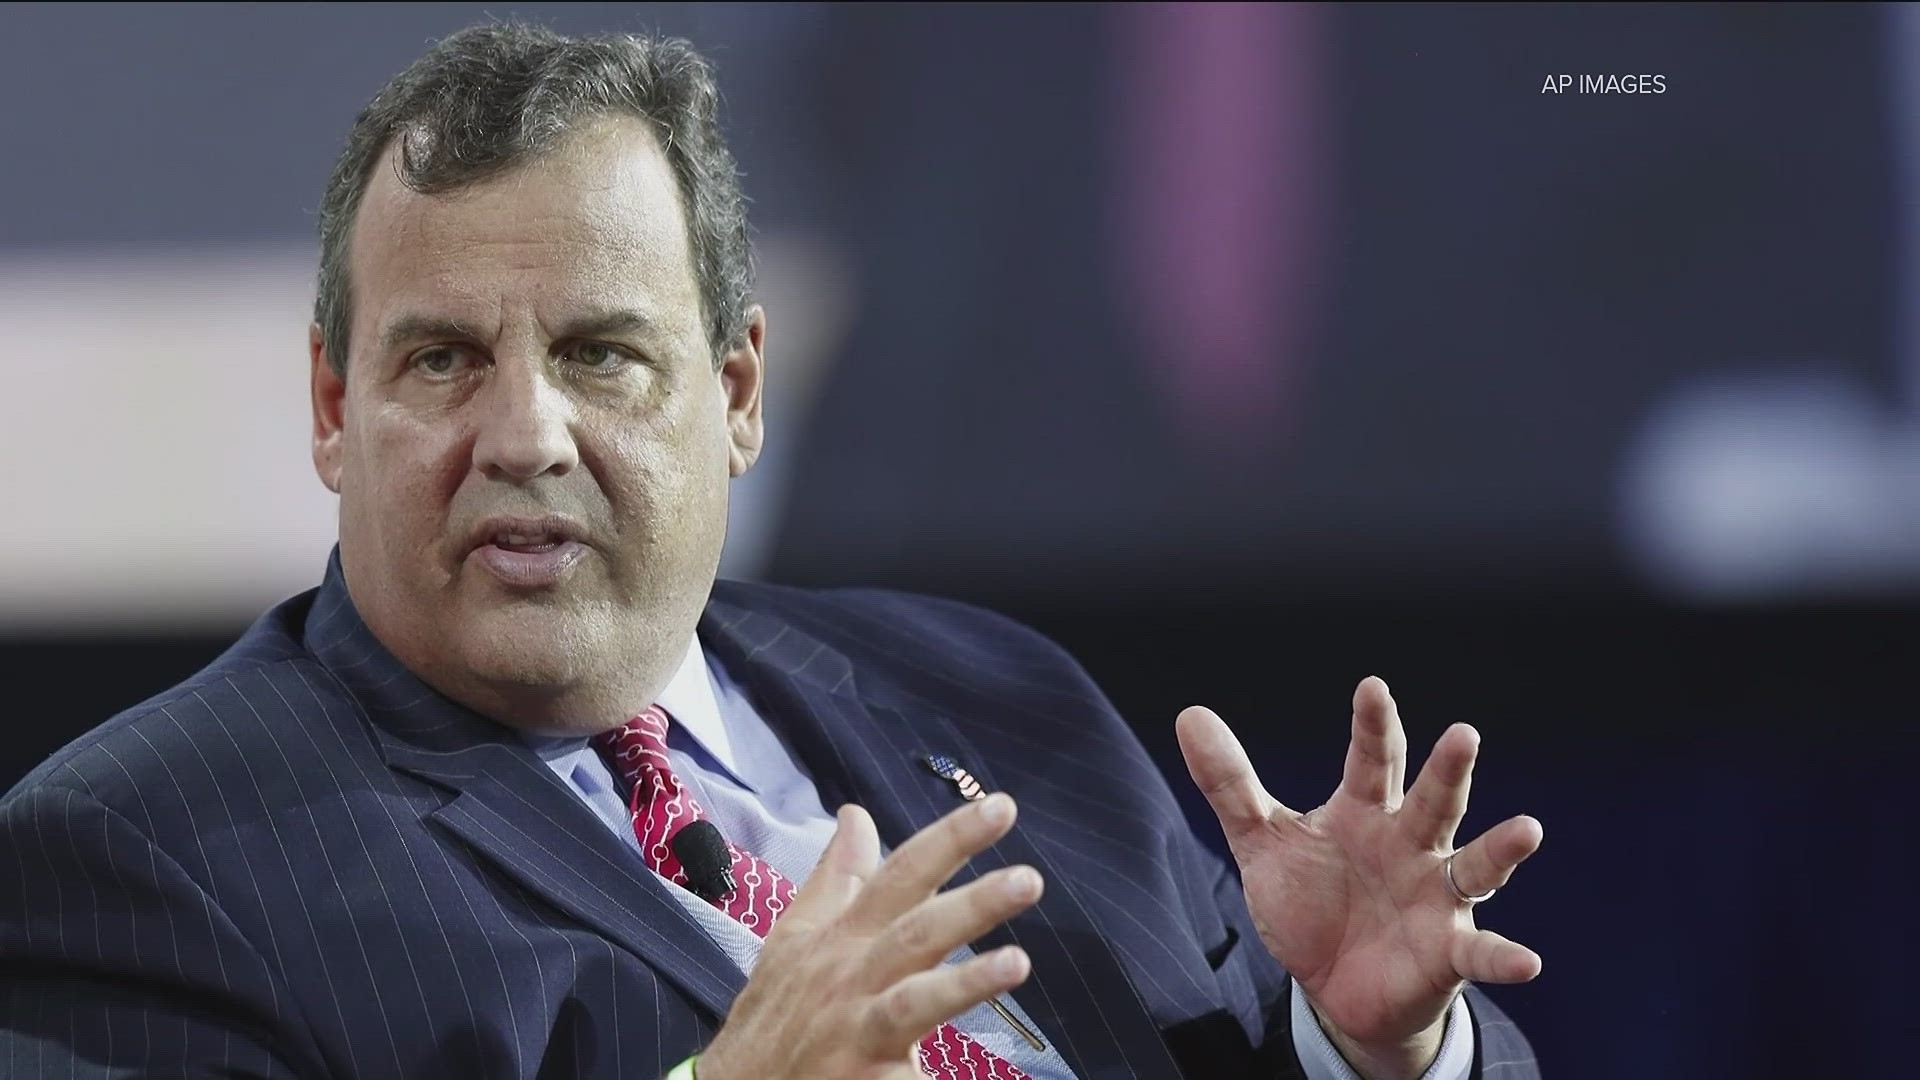 Christie has cast himself as the only person with the guts to take on Trump directly and has warned of a repeat of 2016 if candidates fail to confront him.